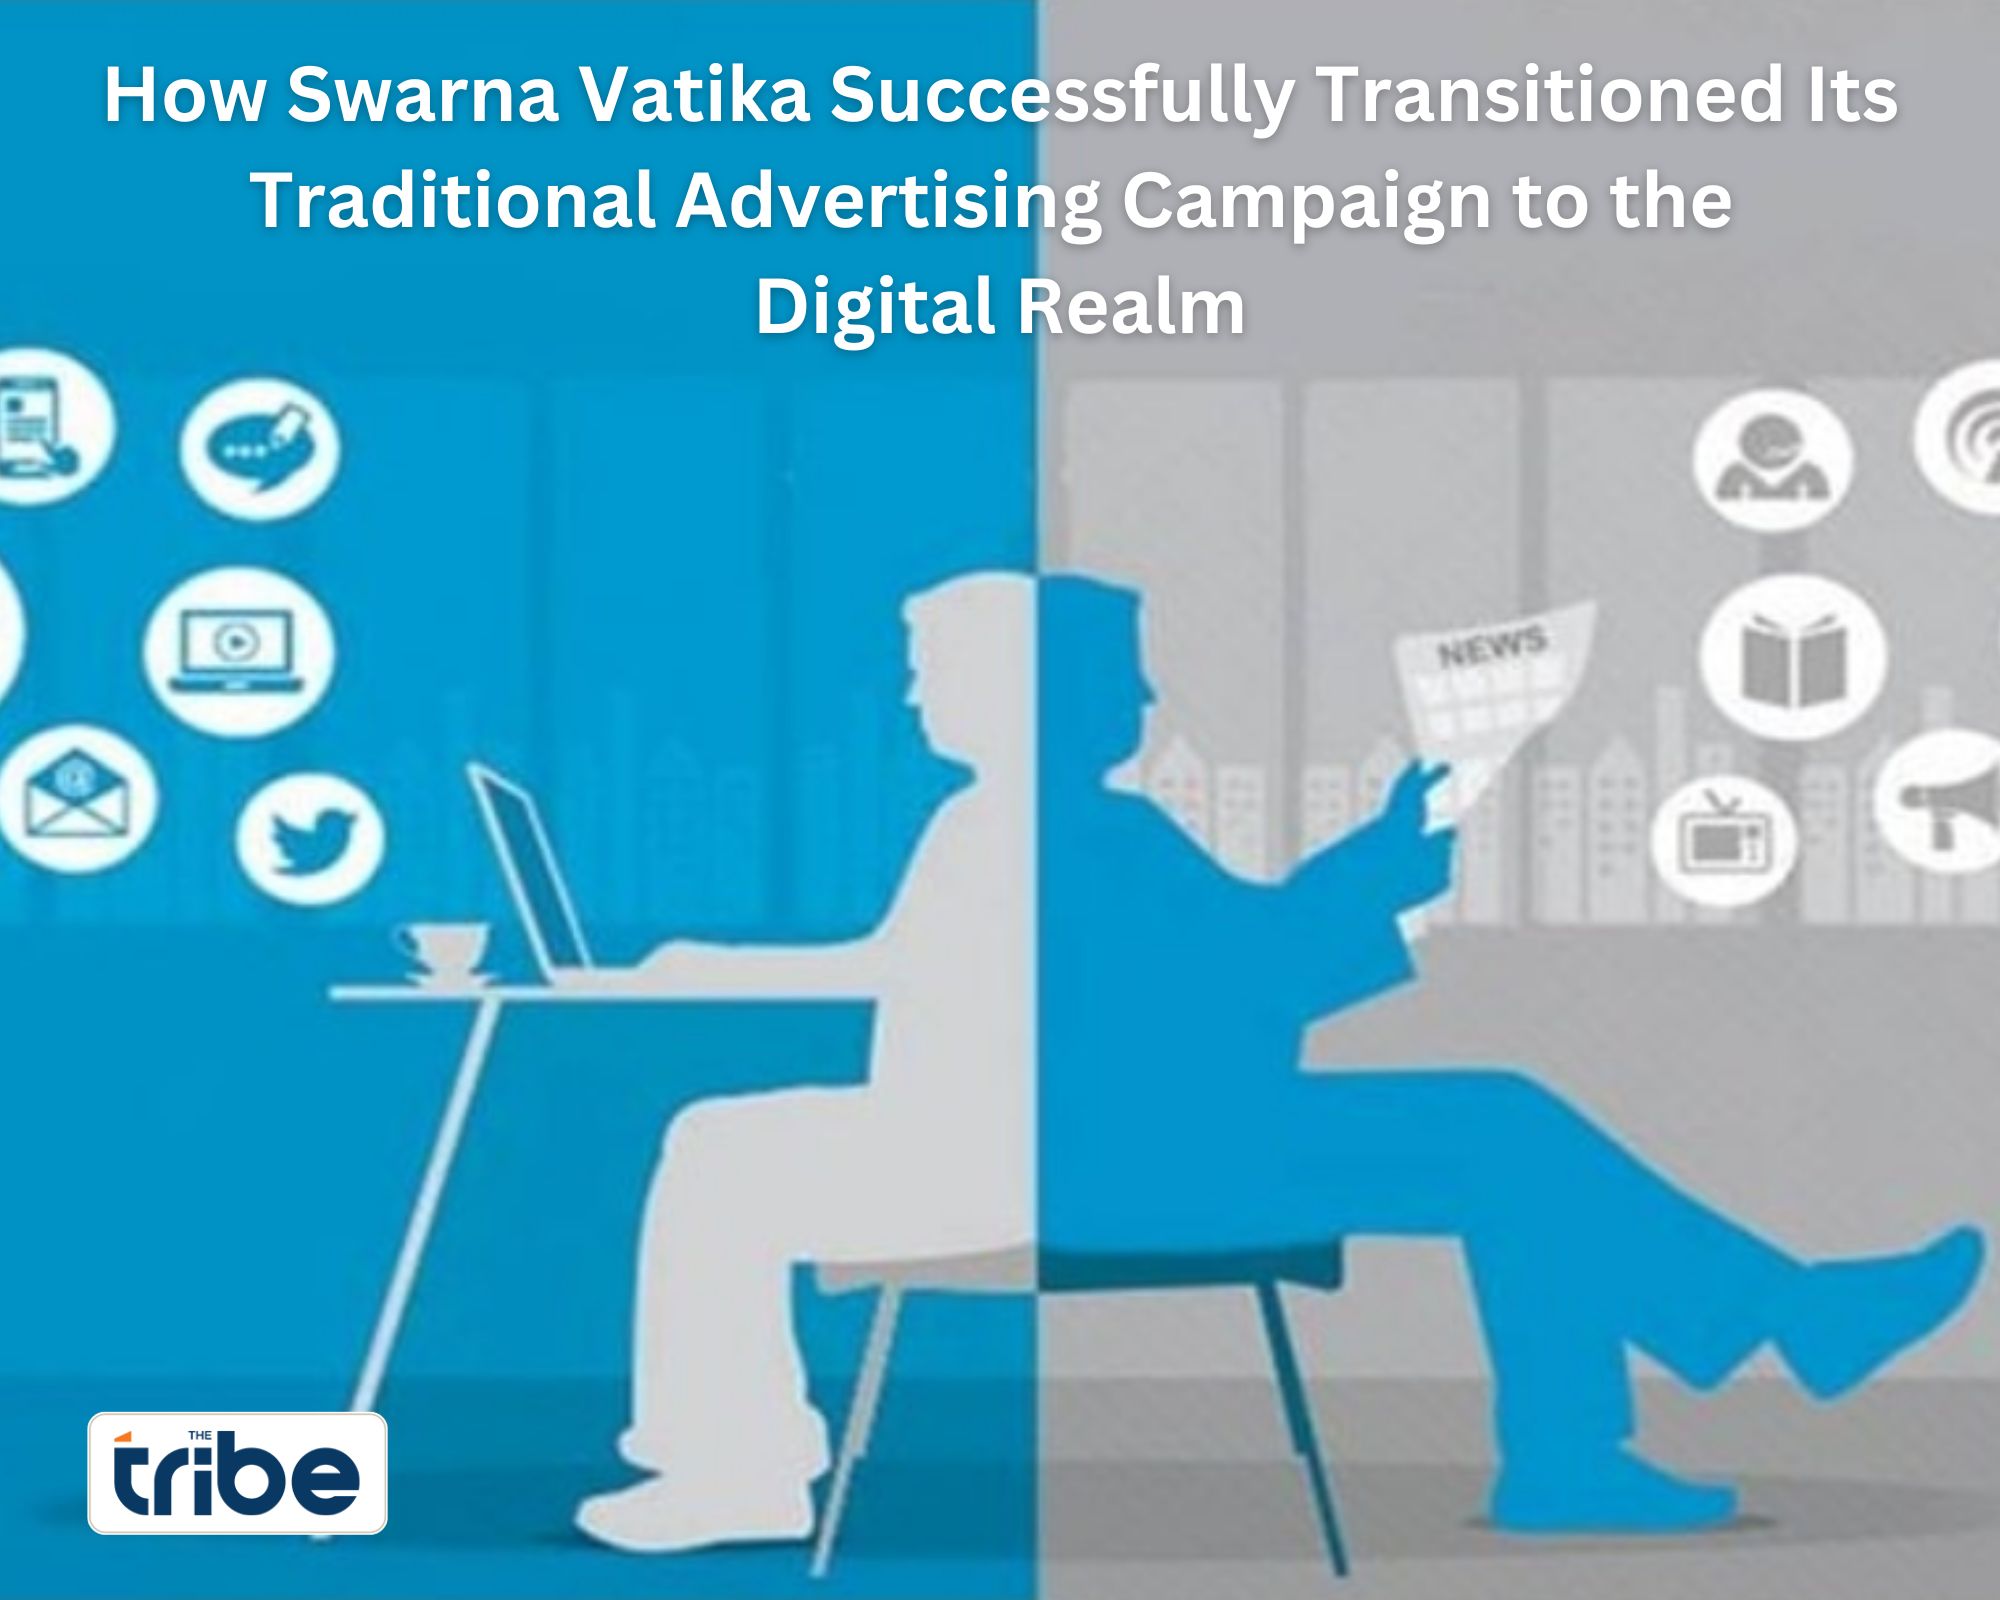 How Swarna Vatika Successfully Transitioned Its Traditional Advertising Campaign to the Digital Realm